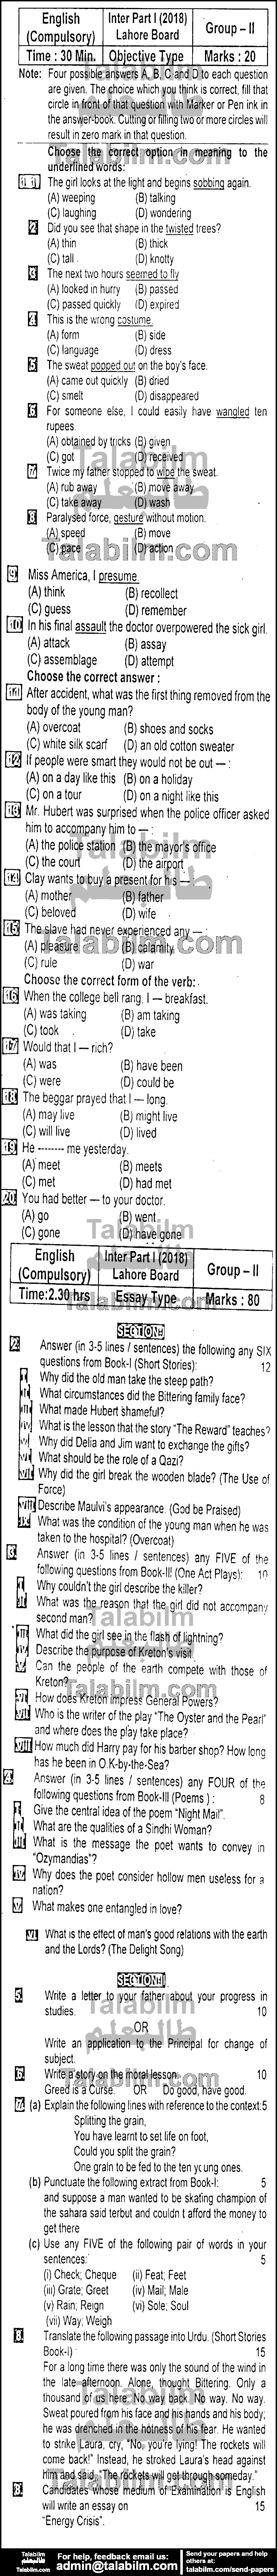 English 0 past paper for Group-II 2018